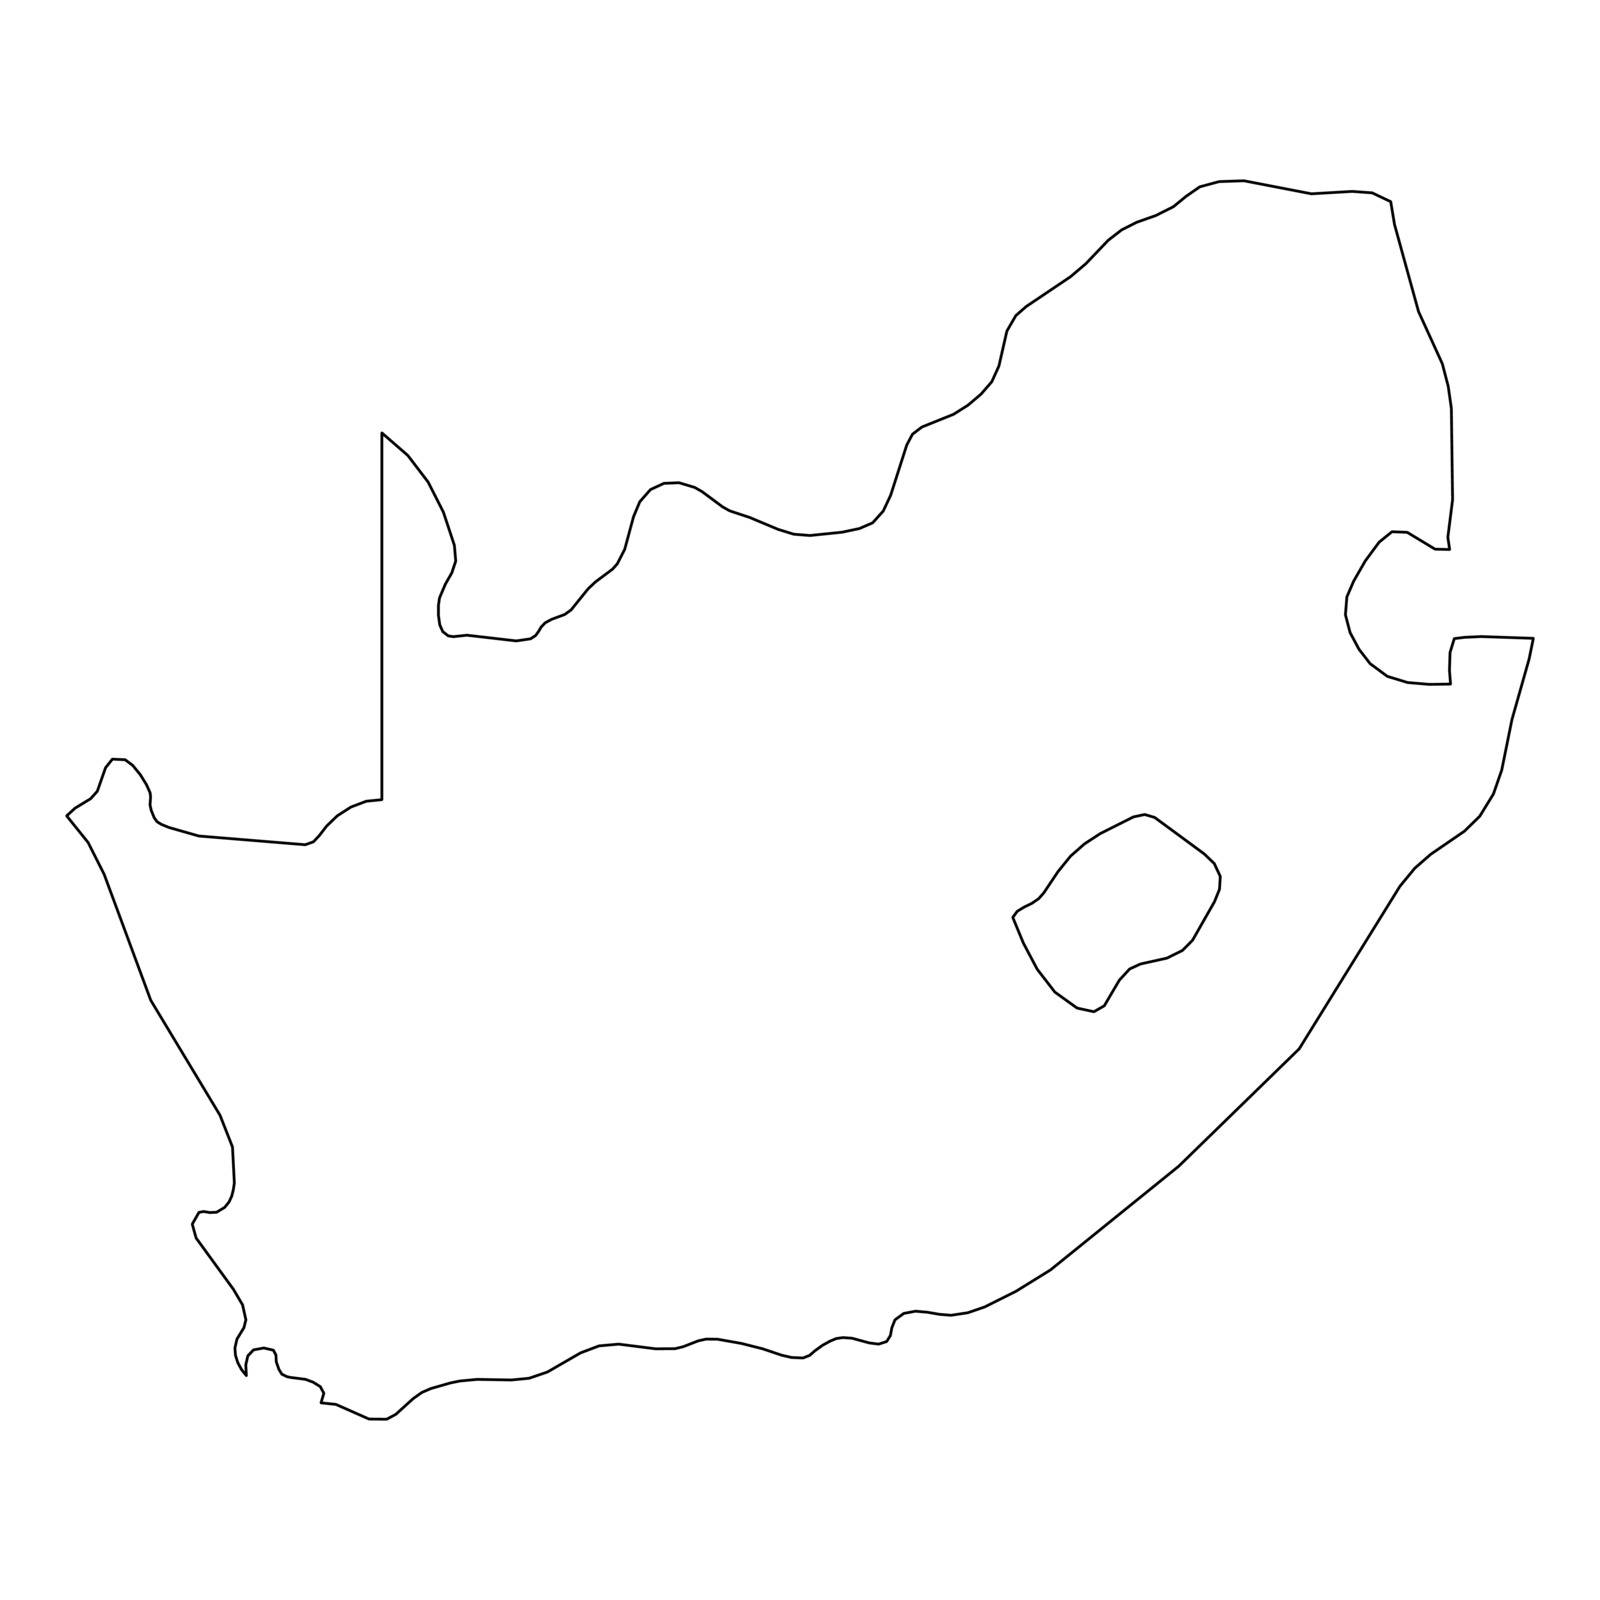 South Africa - solid black outline border map of country area. Simple flat vector illustration.